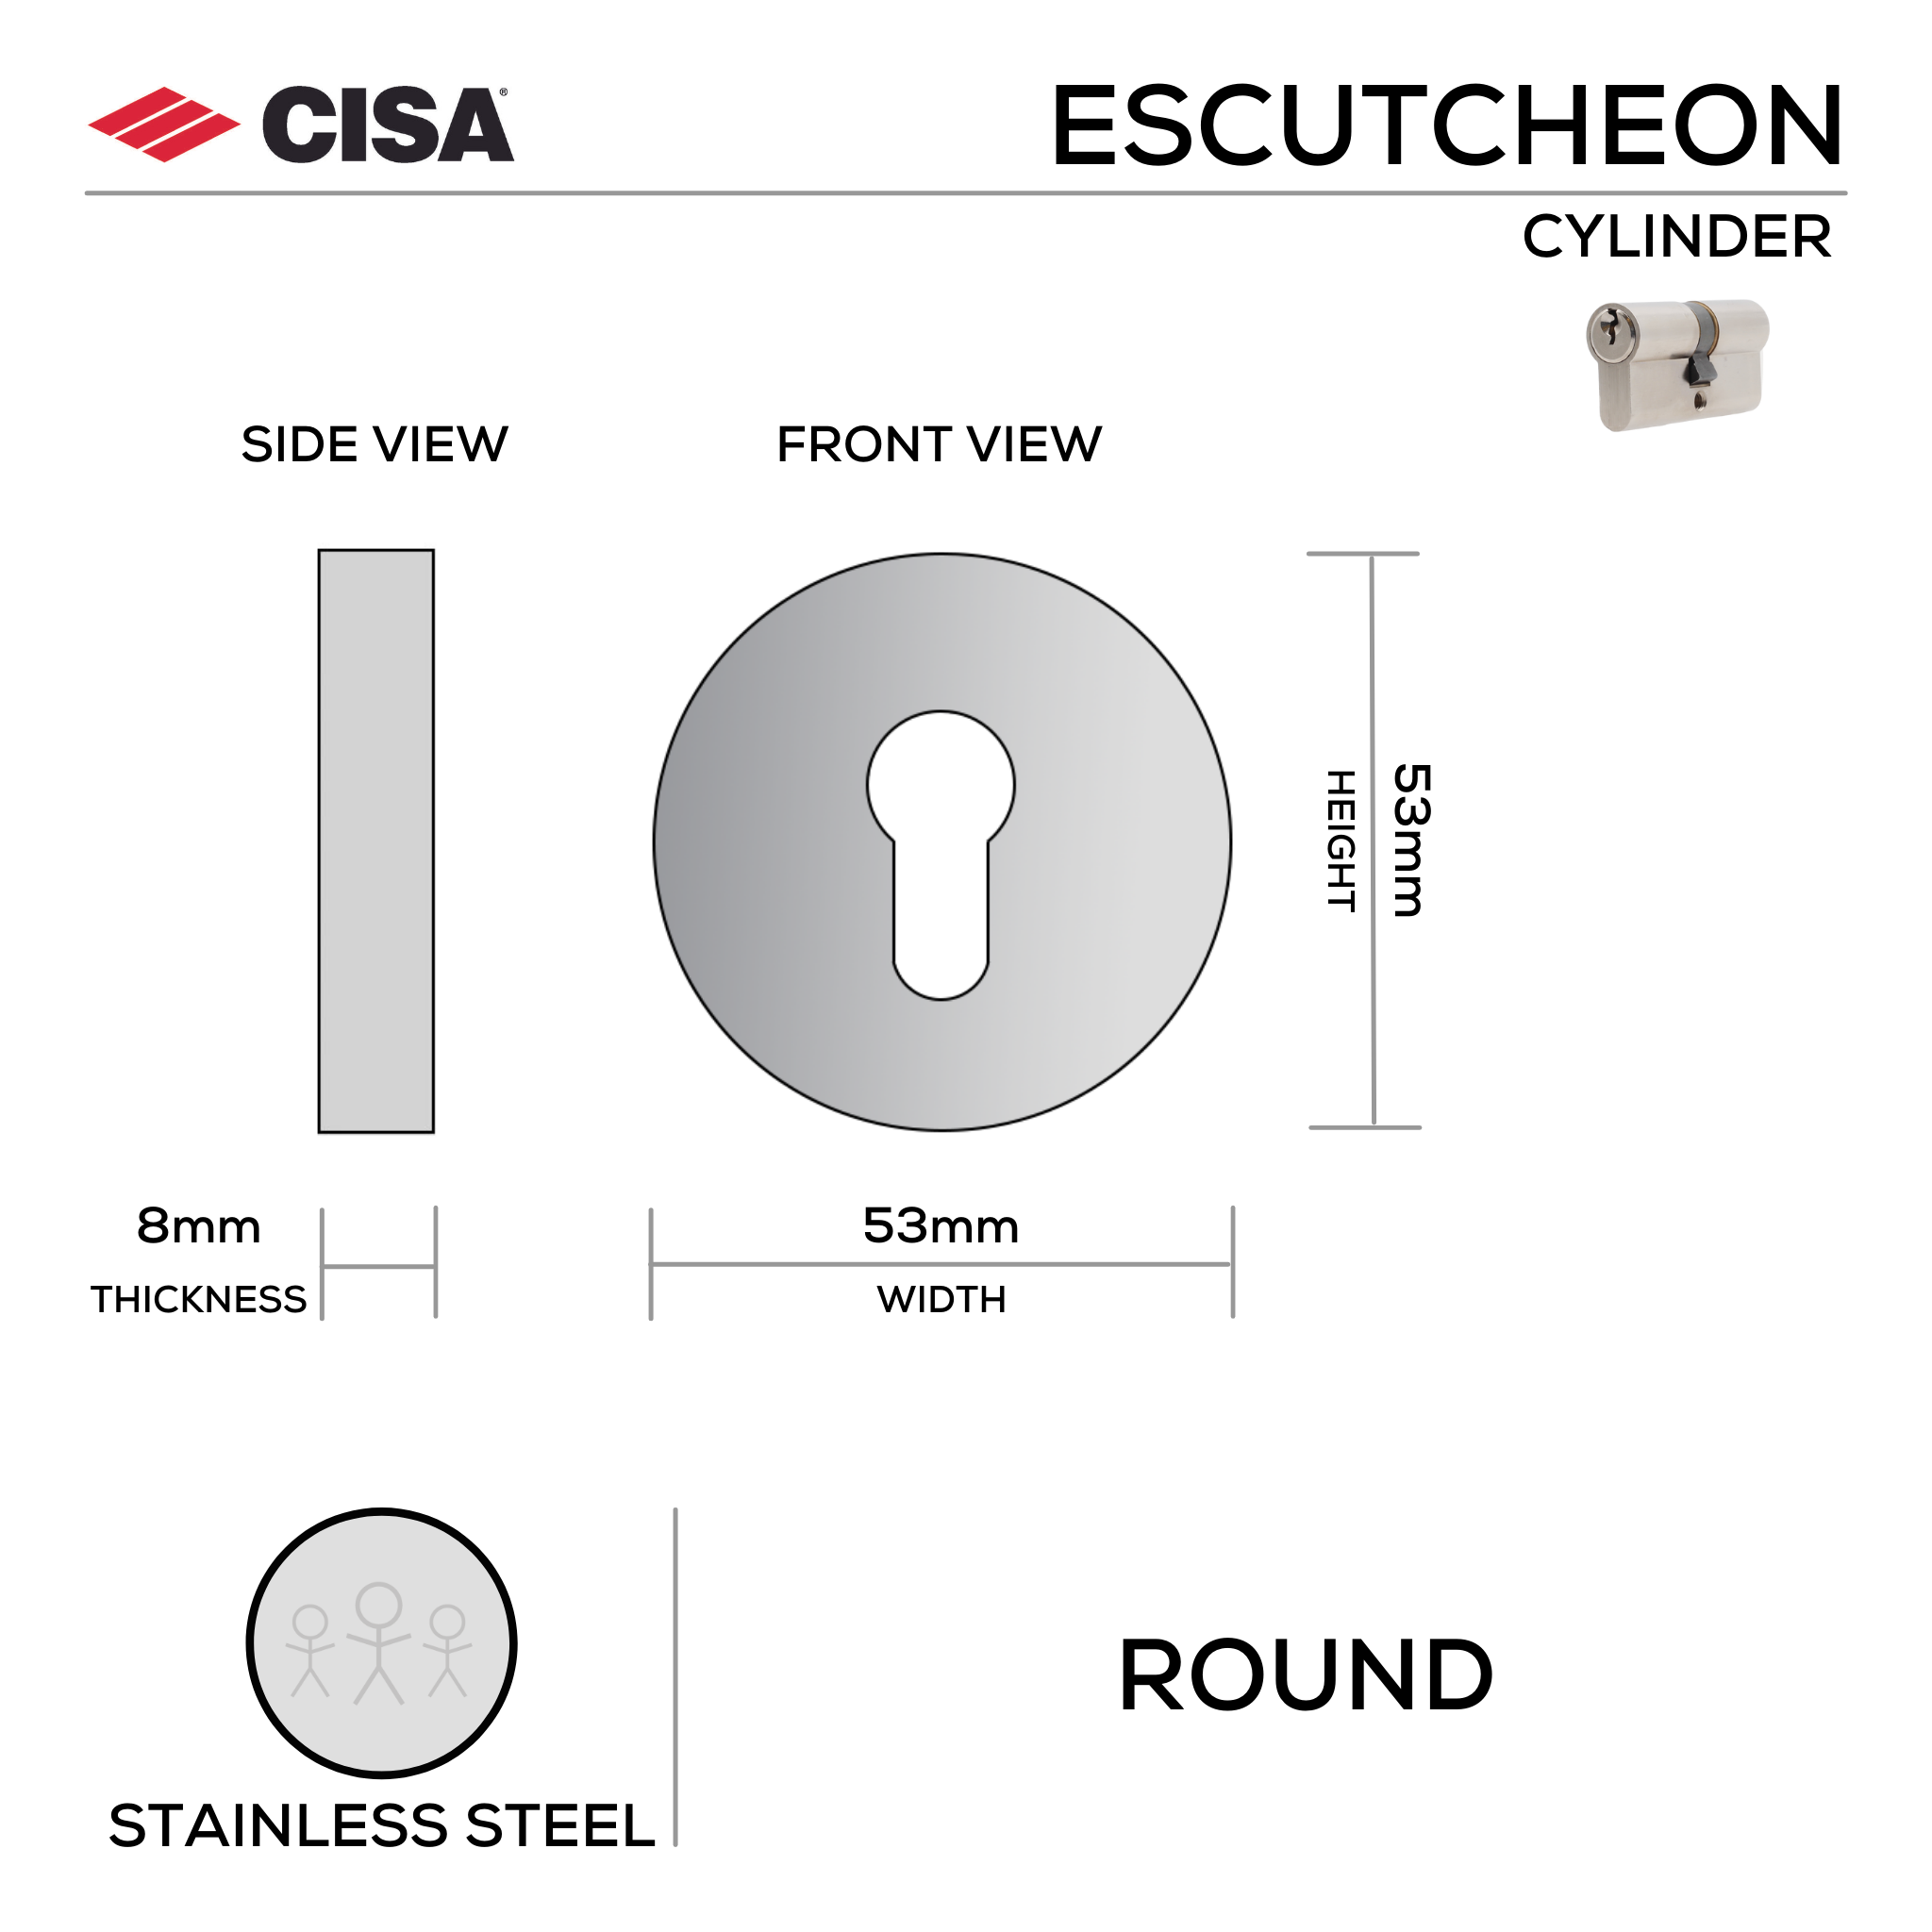 FE.R.C.SS, Cylinder Escutcheon, Round Rose, 53mm (h) x 53mm (w) x 8mm (t), Stainless Steel, CISA